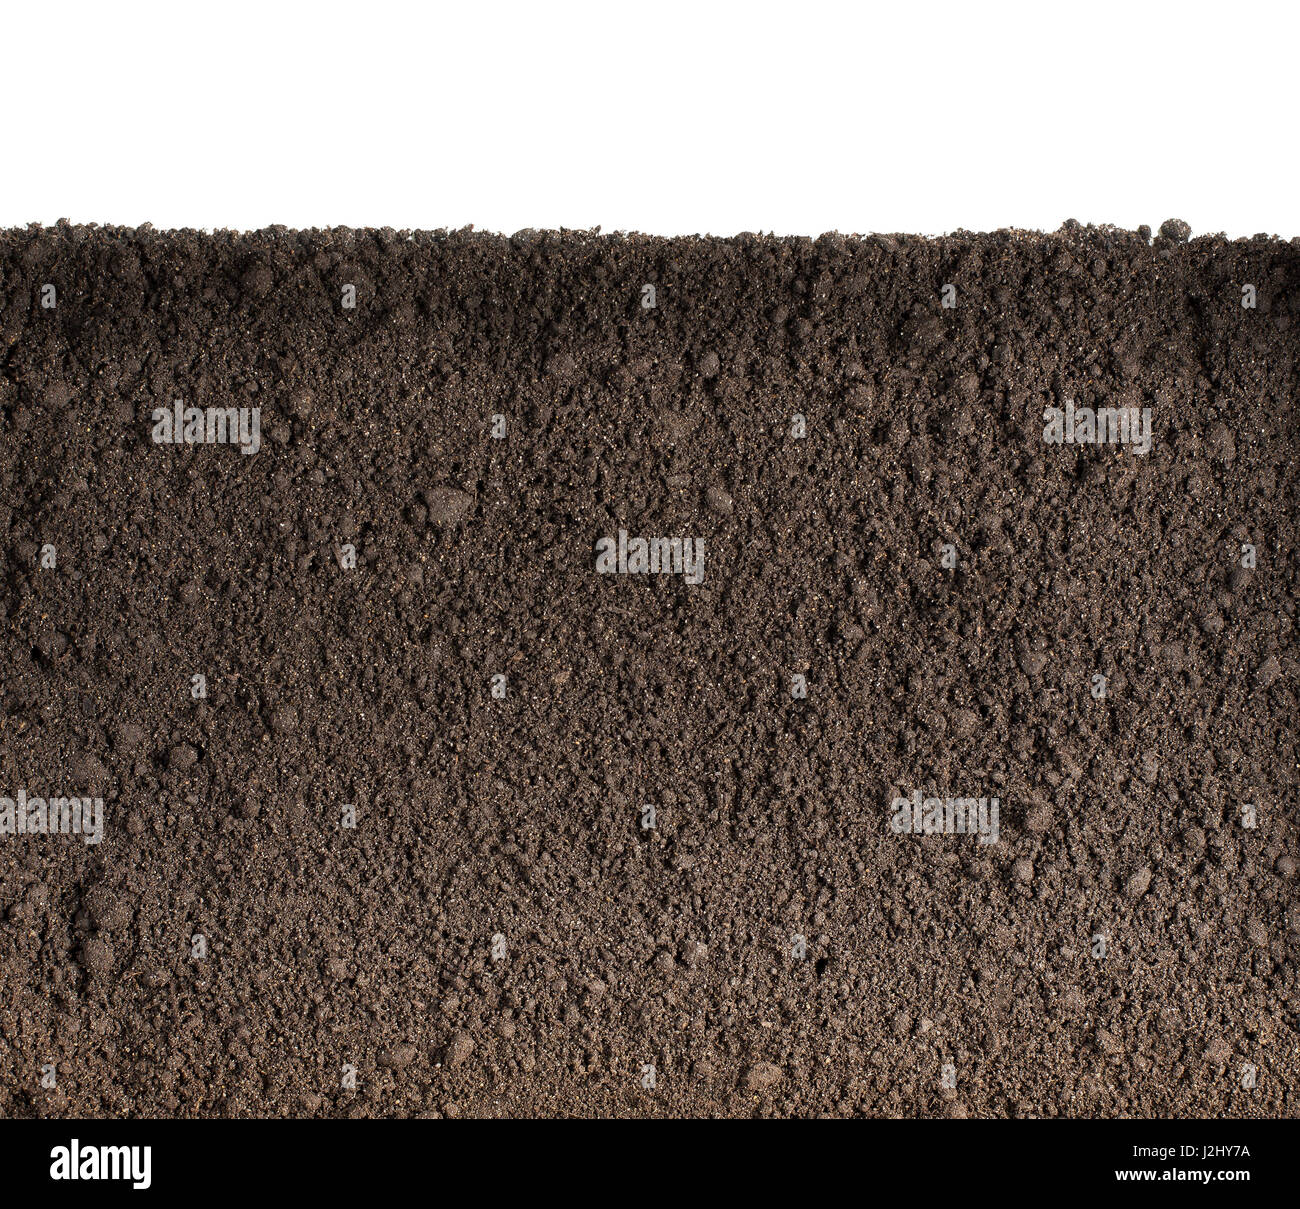 Soil or dirt texture Stock Photo